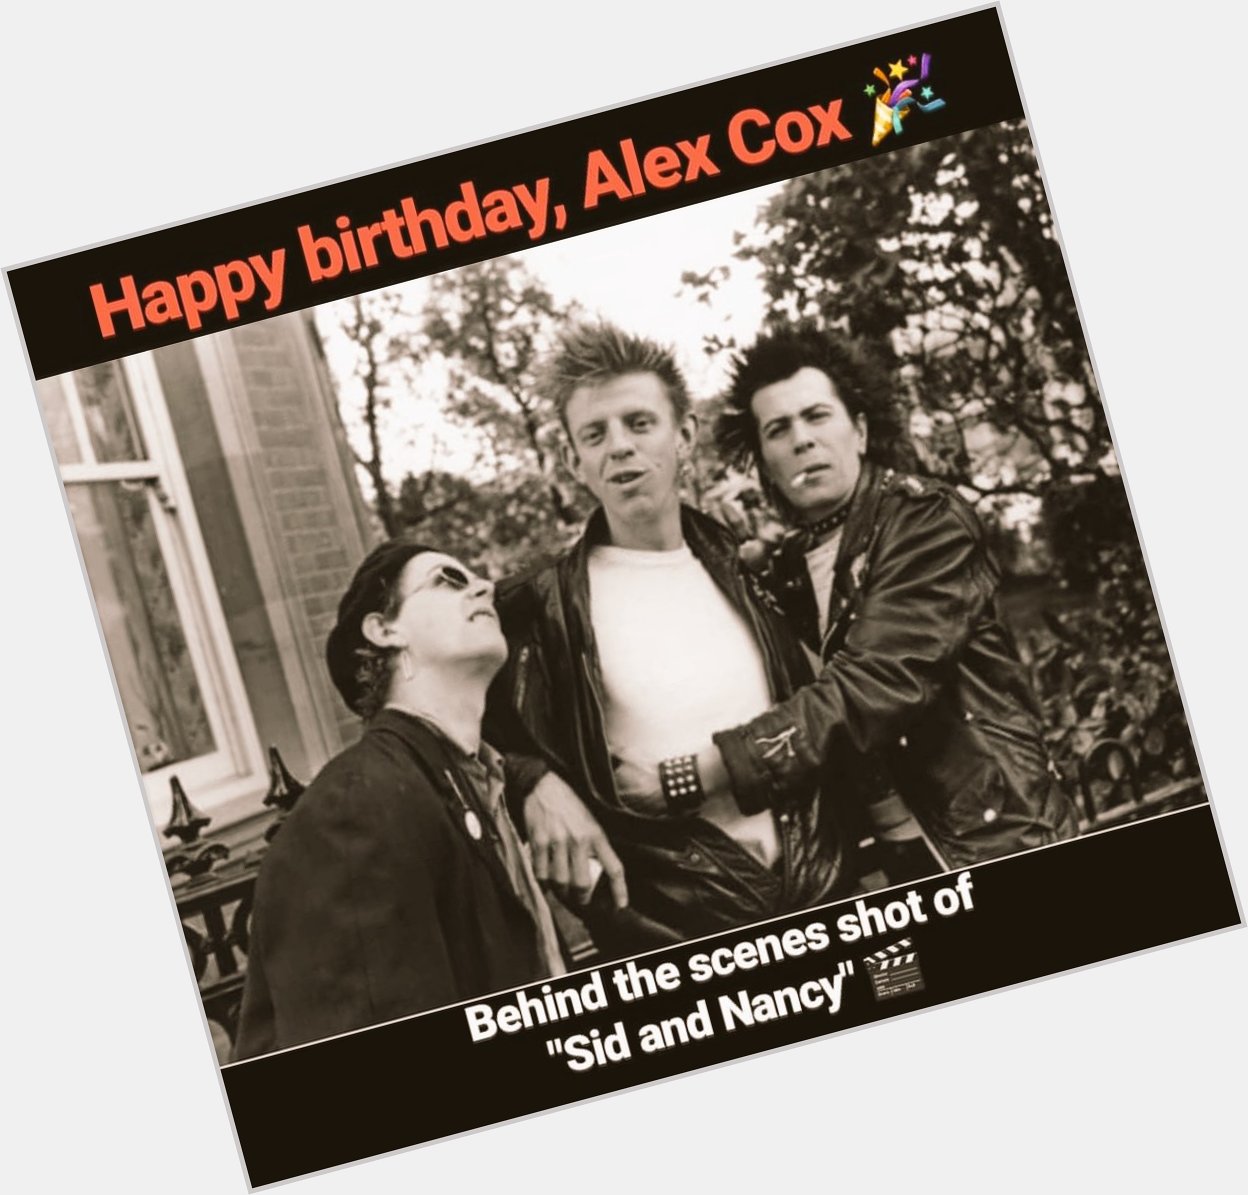  Happy birthday to the director of one of my favorite movies, Alex Cox !   